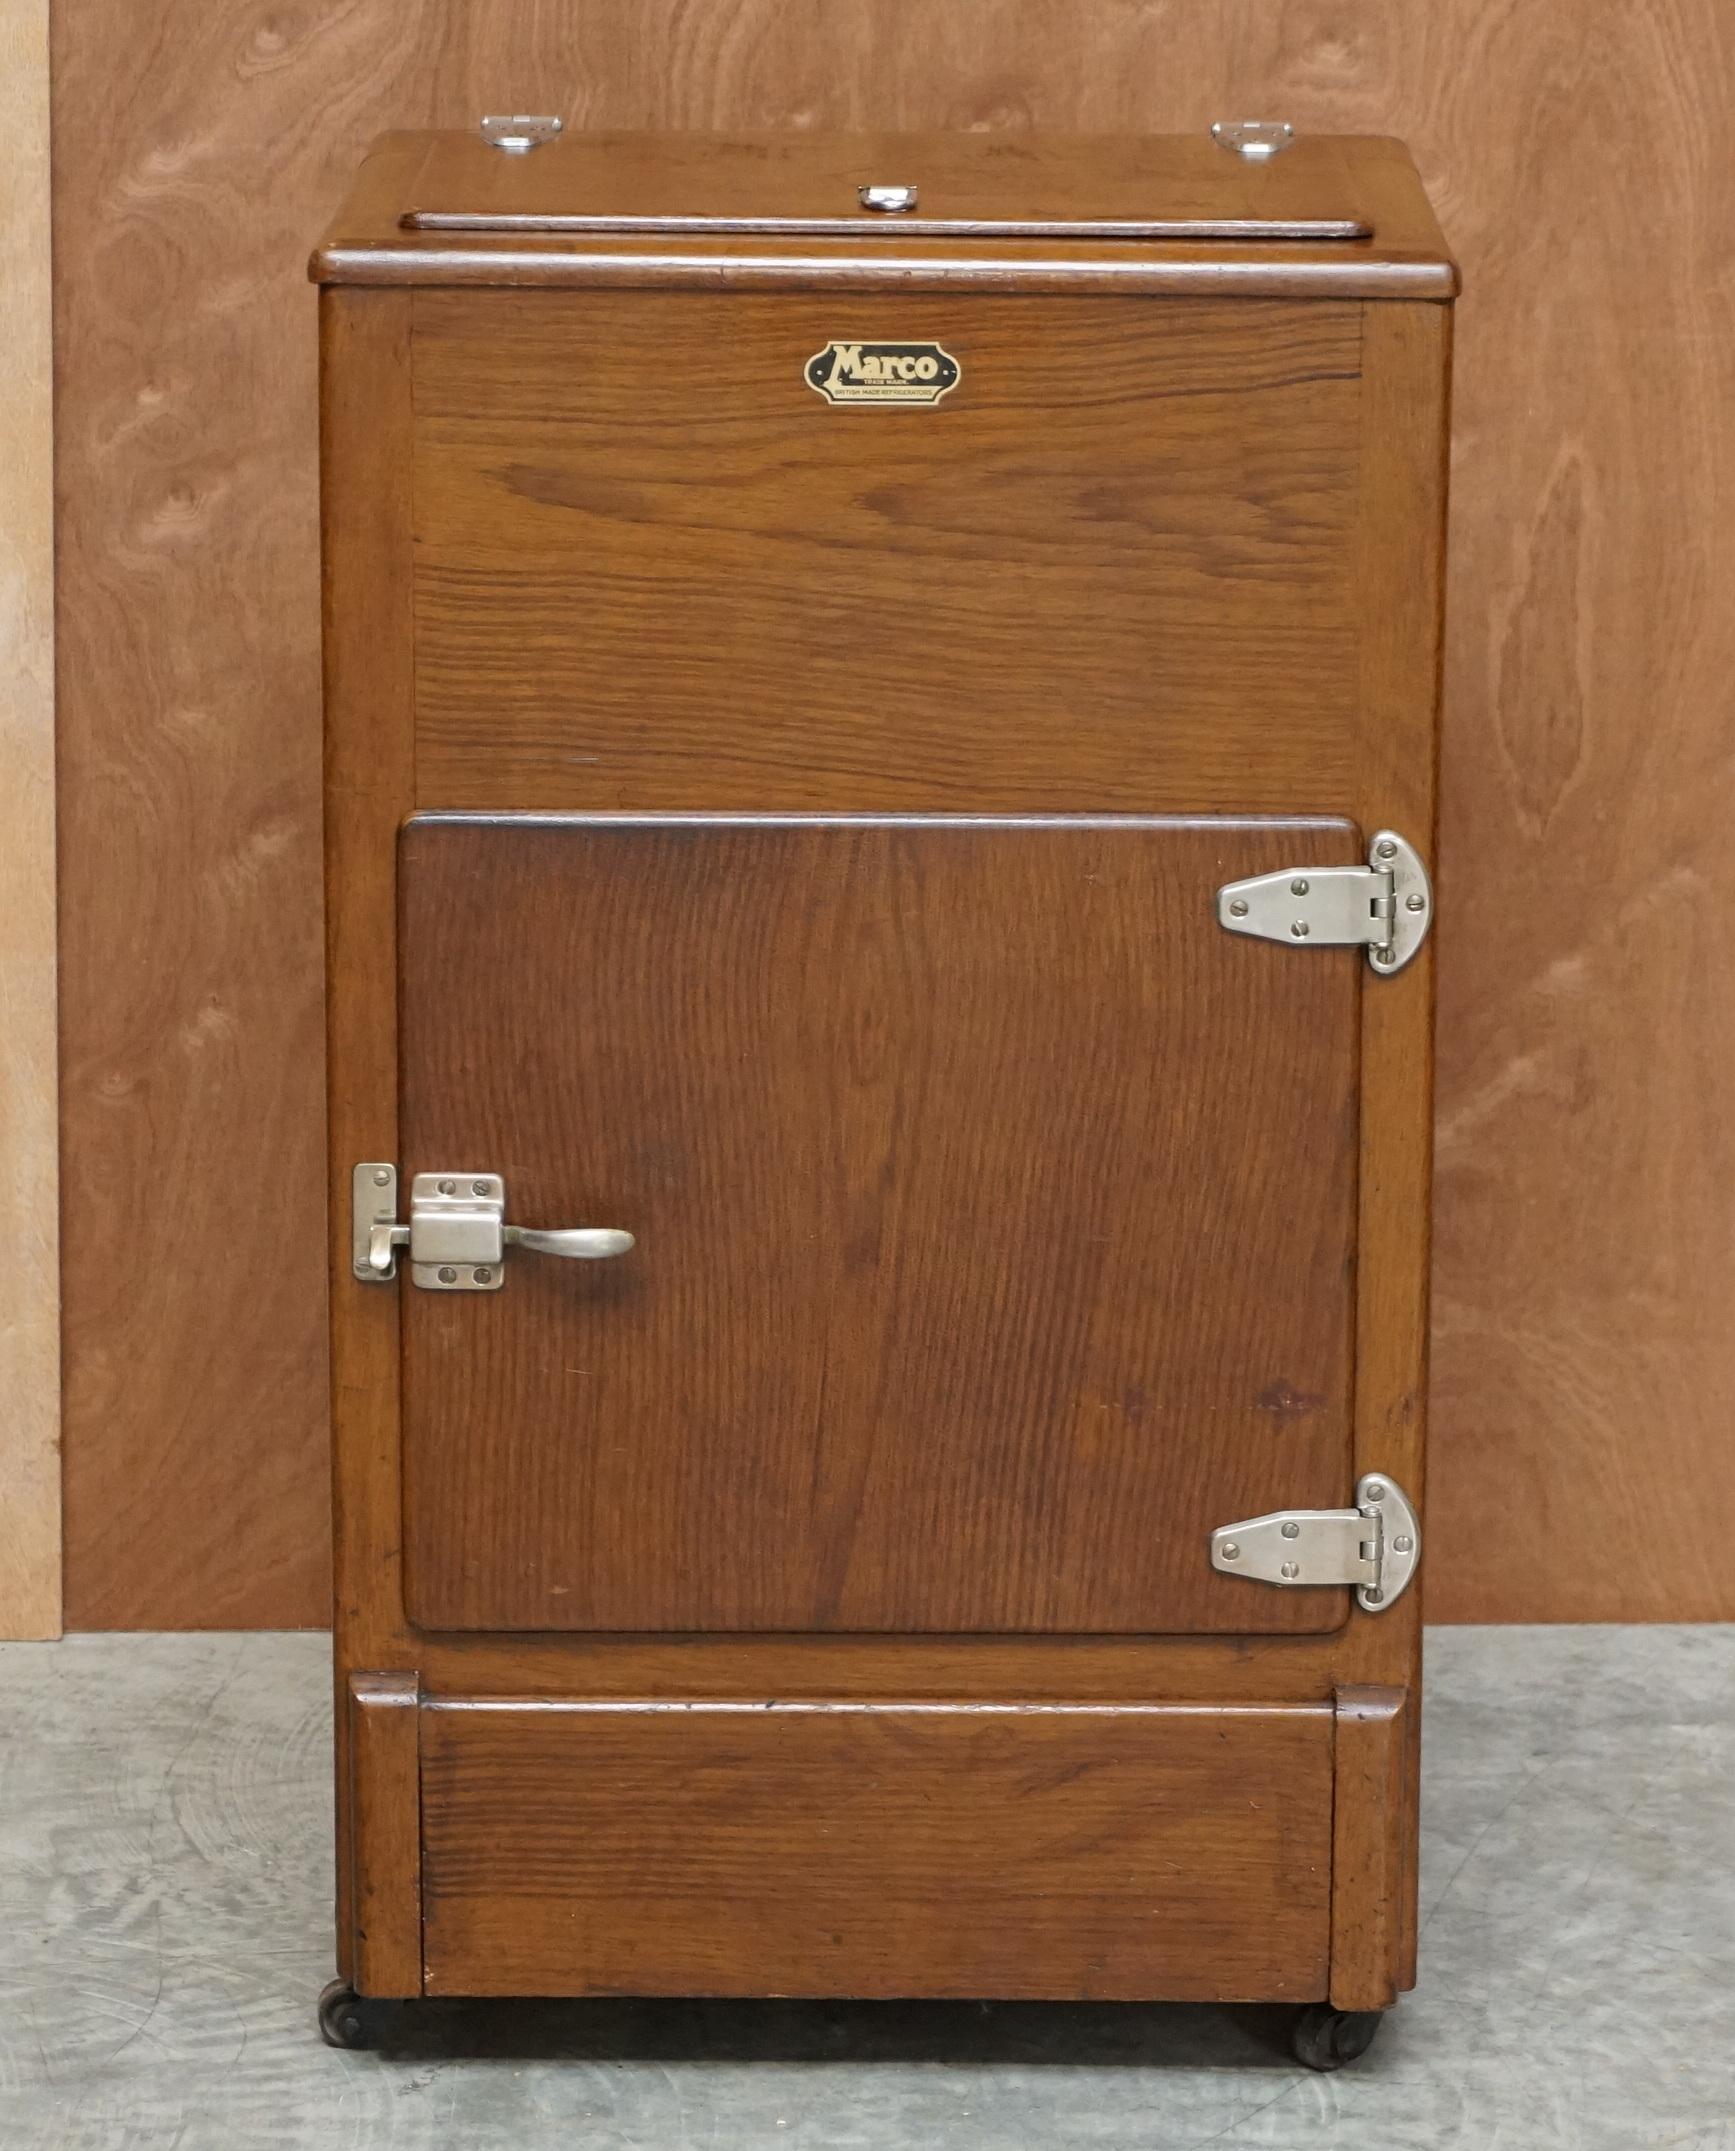 We are delighted to offer for sale this stunning hand made in England Marco refrigerator with period wood frame 

A very good looking, well made and decorative piece. This is designed to be used as an ice fridge so you put large blocks or bags of